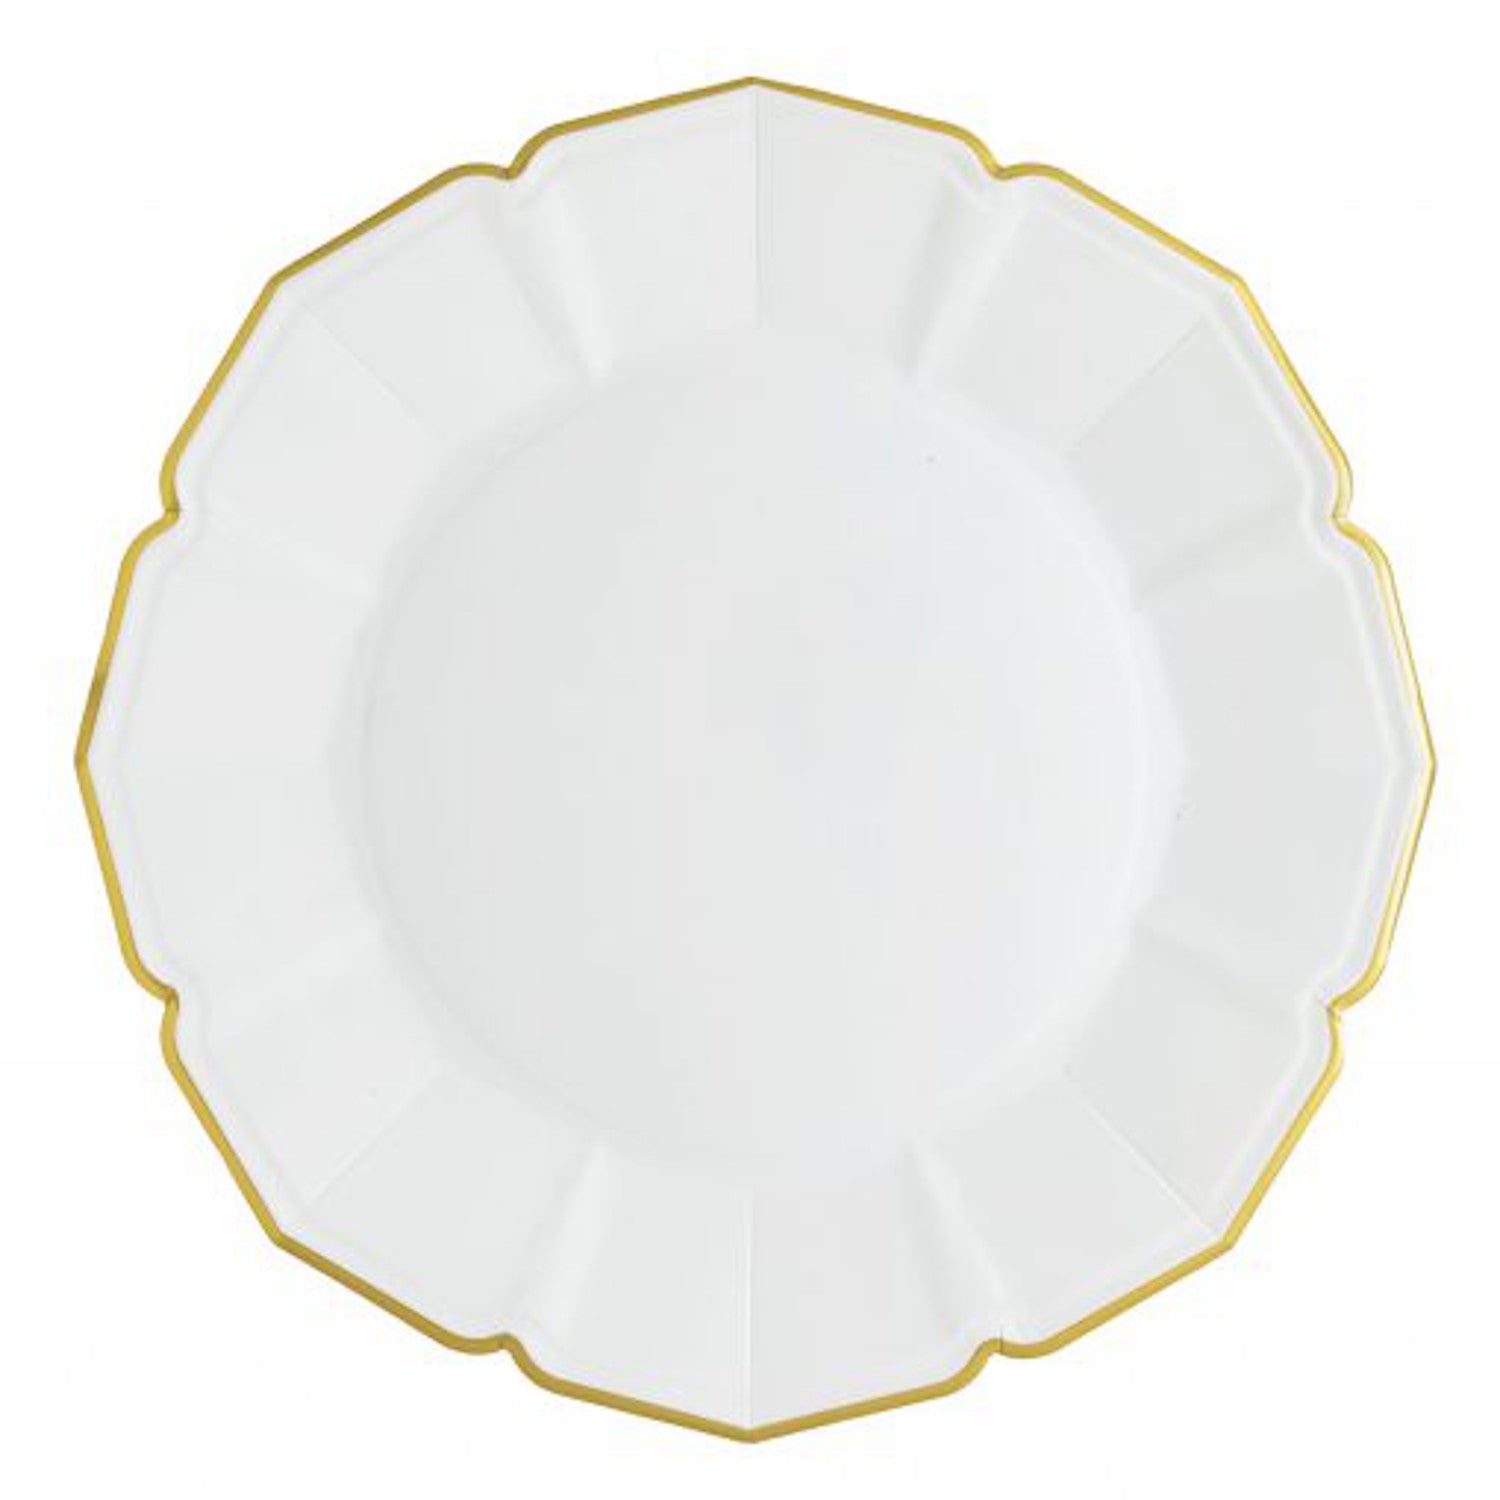 A White Scalloped plate with gold rim from Eid Creations.